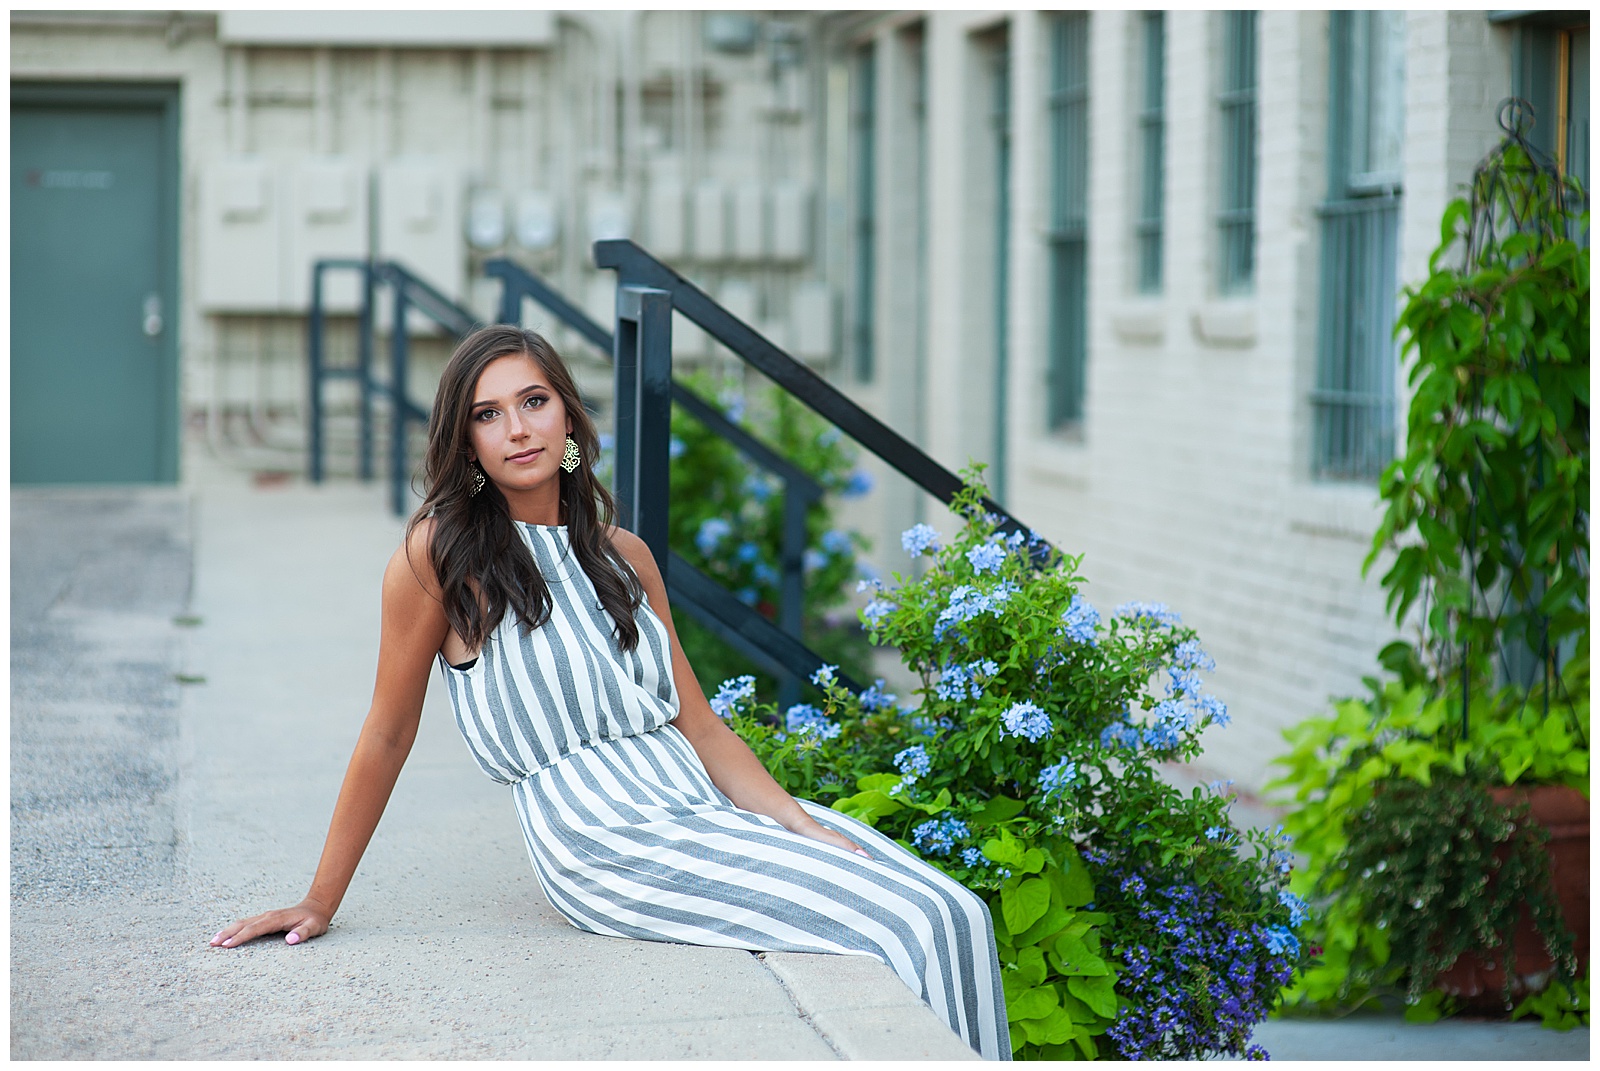 high school senior sitting in front building and plants senior pictures Kim Stiffler Photography